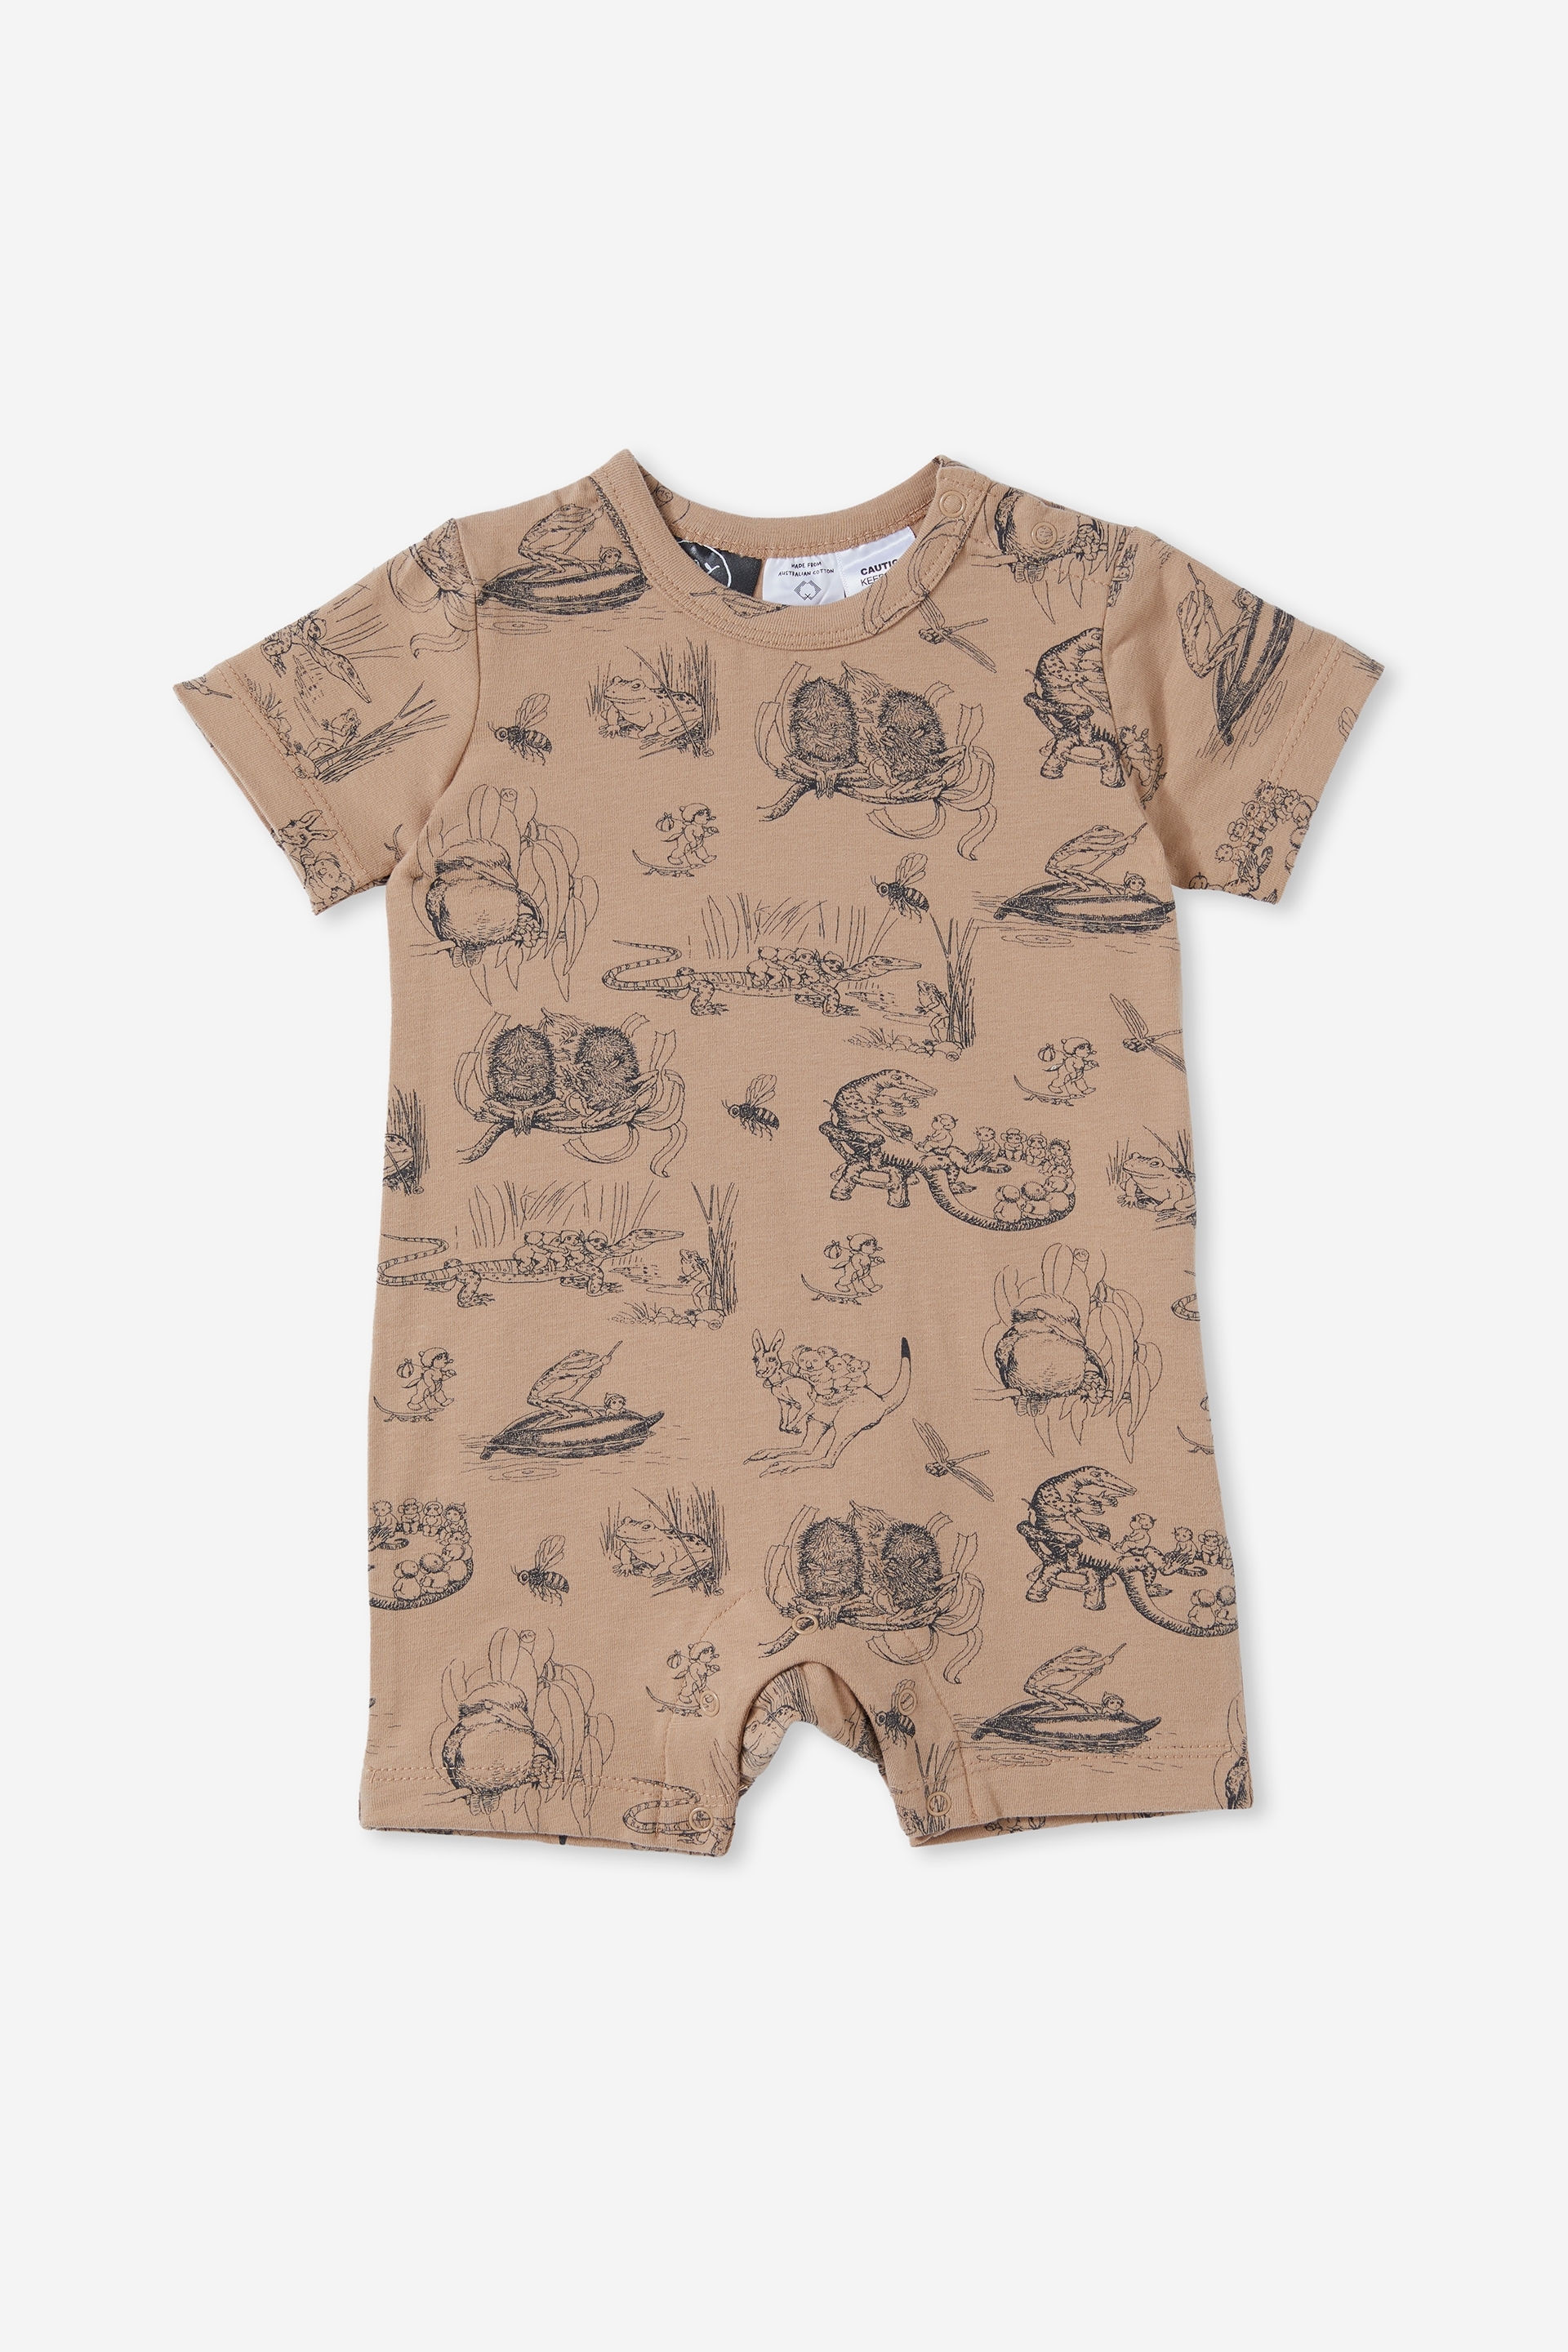 Cotton On Kids - The Short Sleeve Romper License - Lcn may taupy brown/bush mates